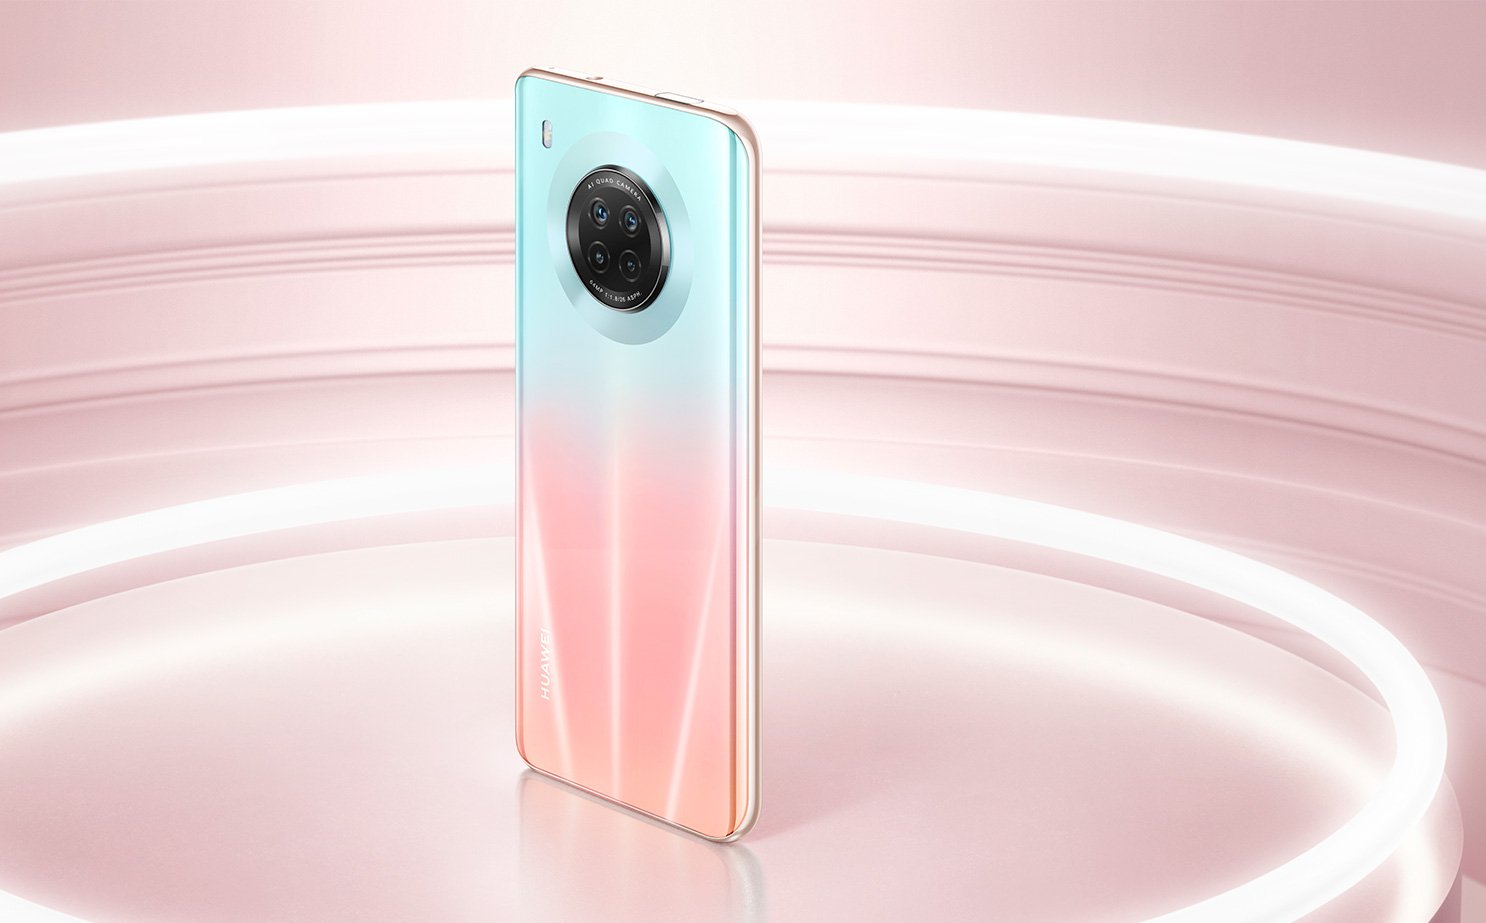 HUAWEI Y9a announced with MediaTek helio G80, 64MP quad-camera, and 40W fast charging